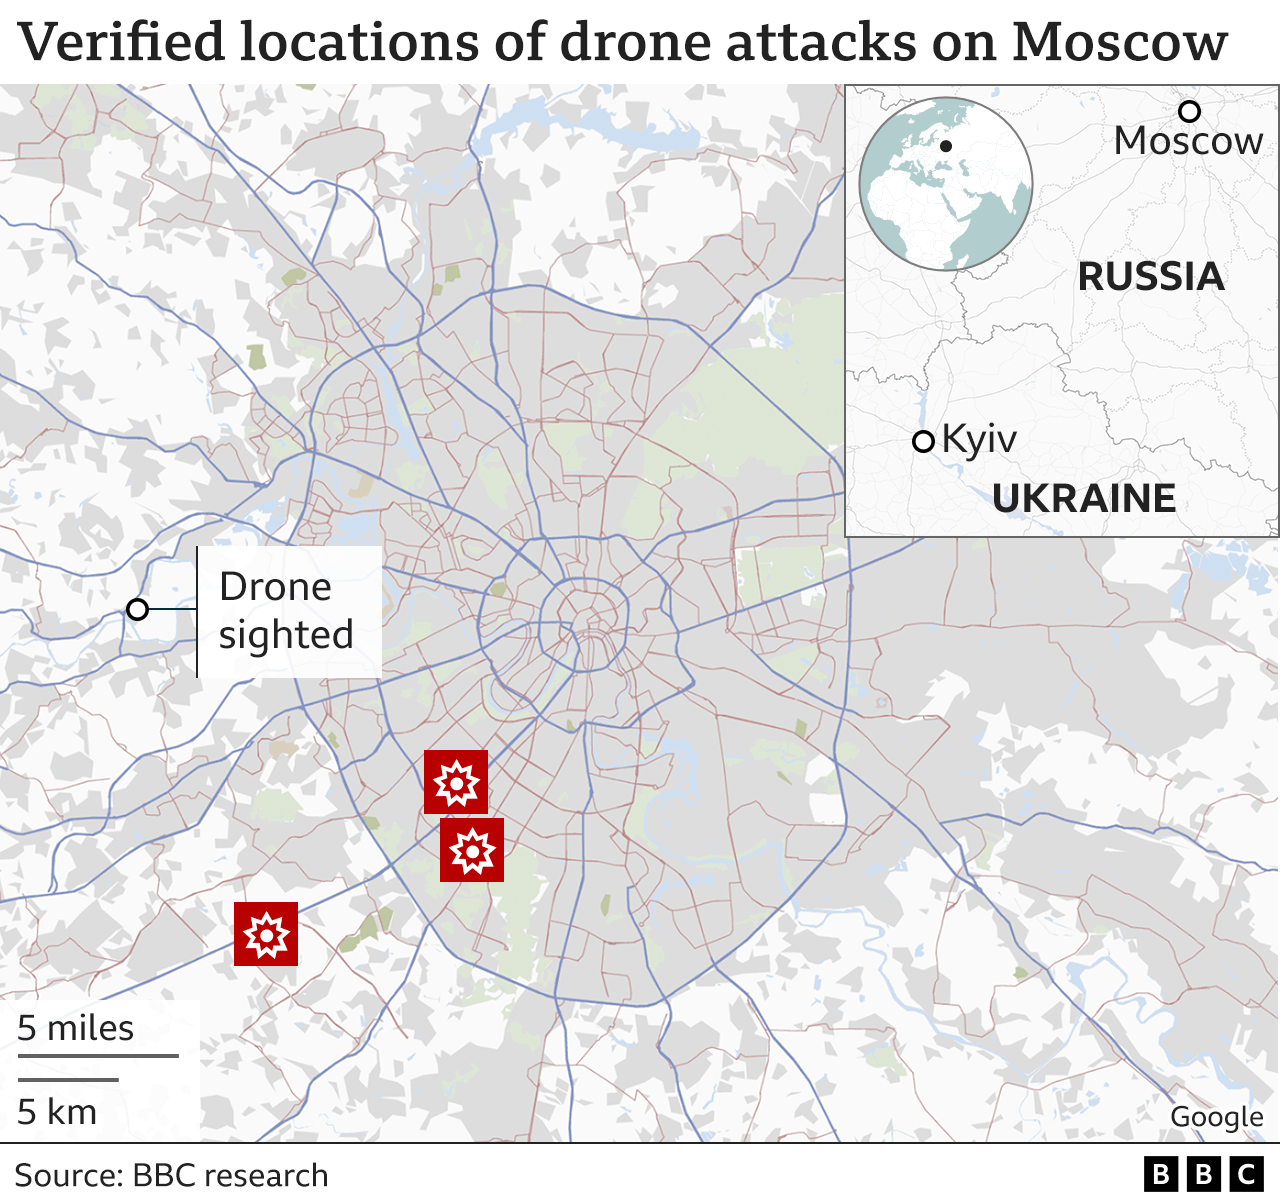 Strike sites in Moscow